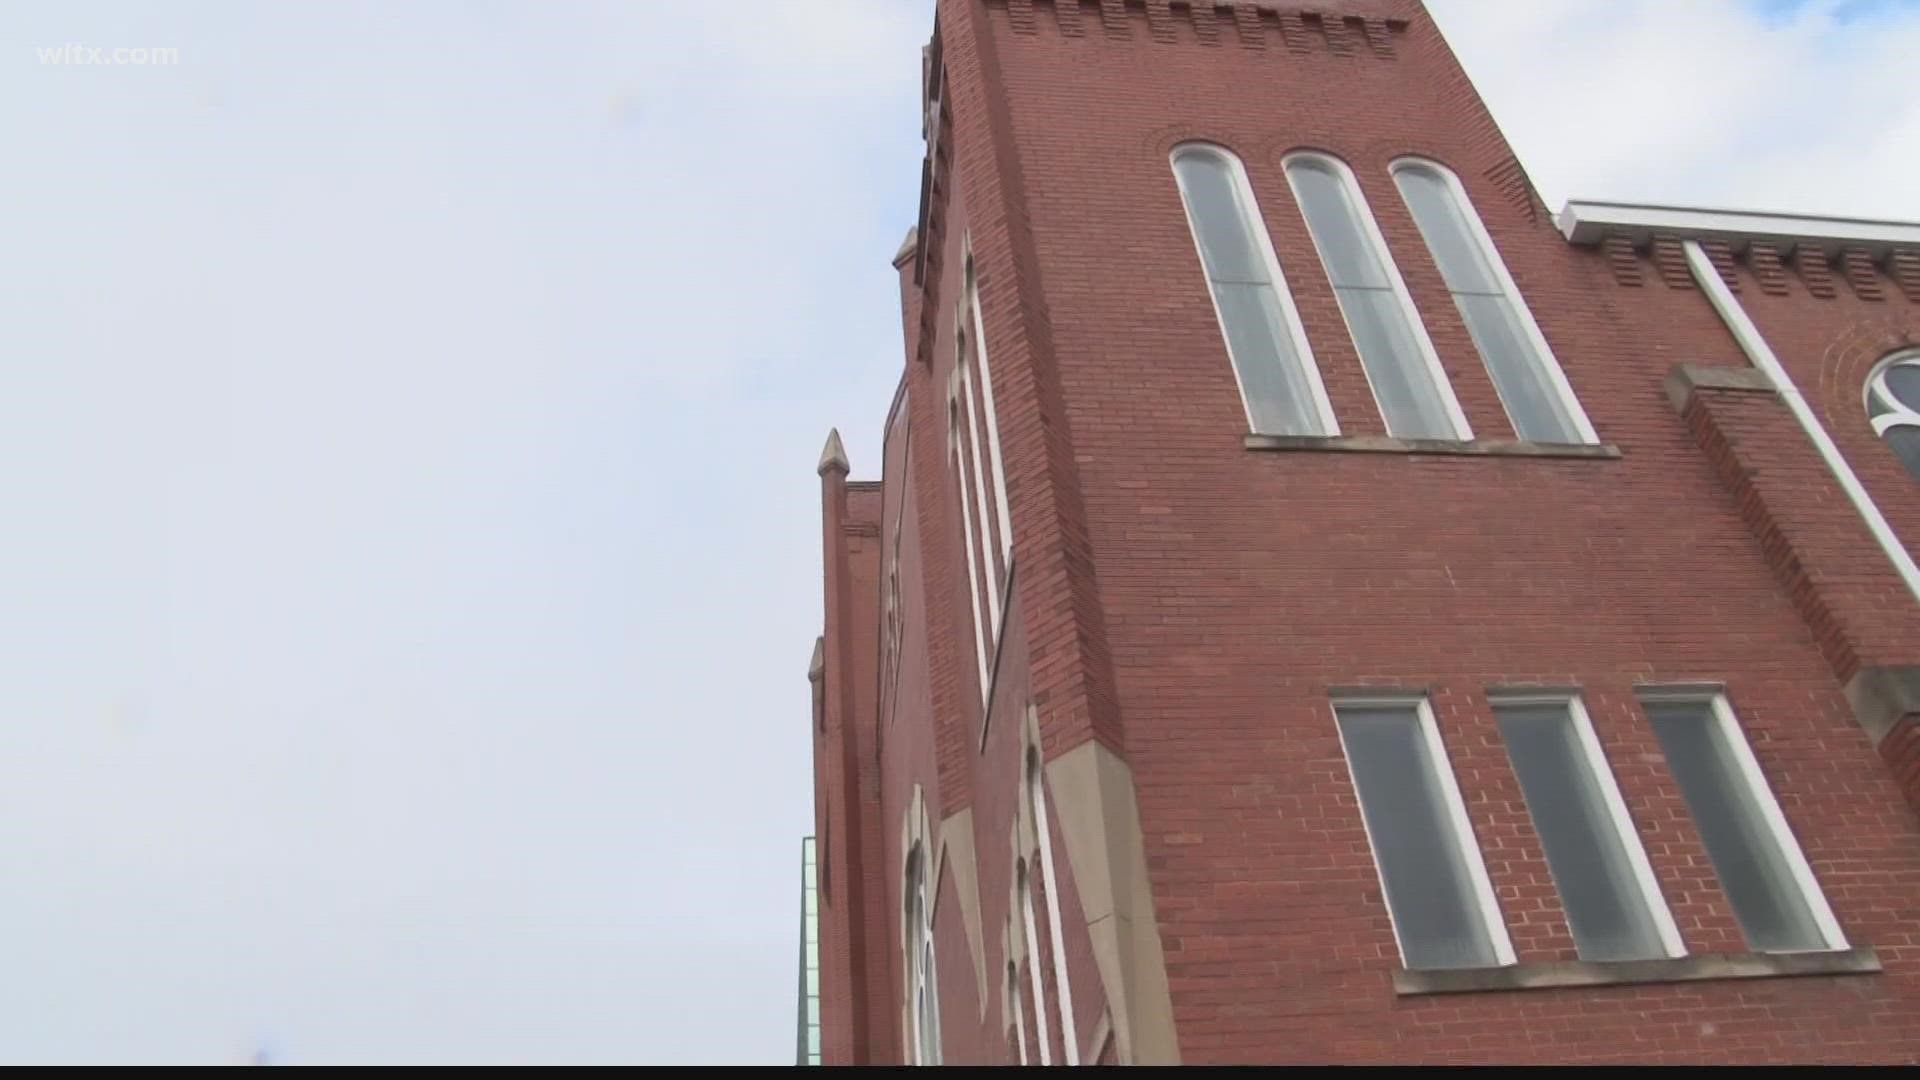 Contractors received approval today to create an addition to Bethel AME Church on Sumter street.